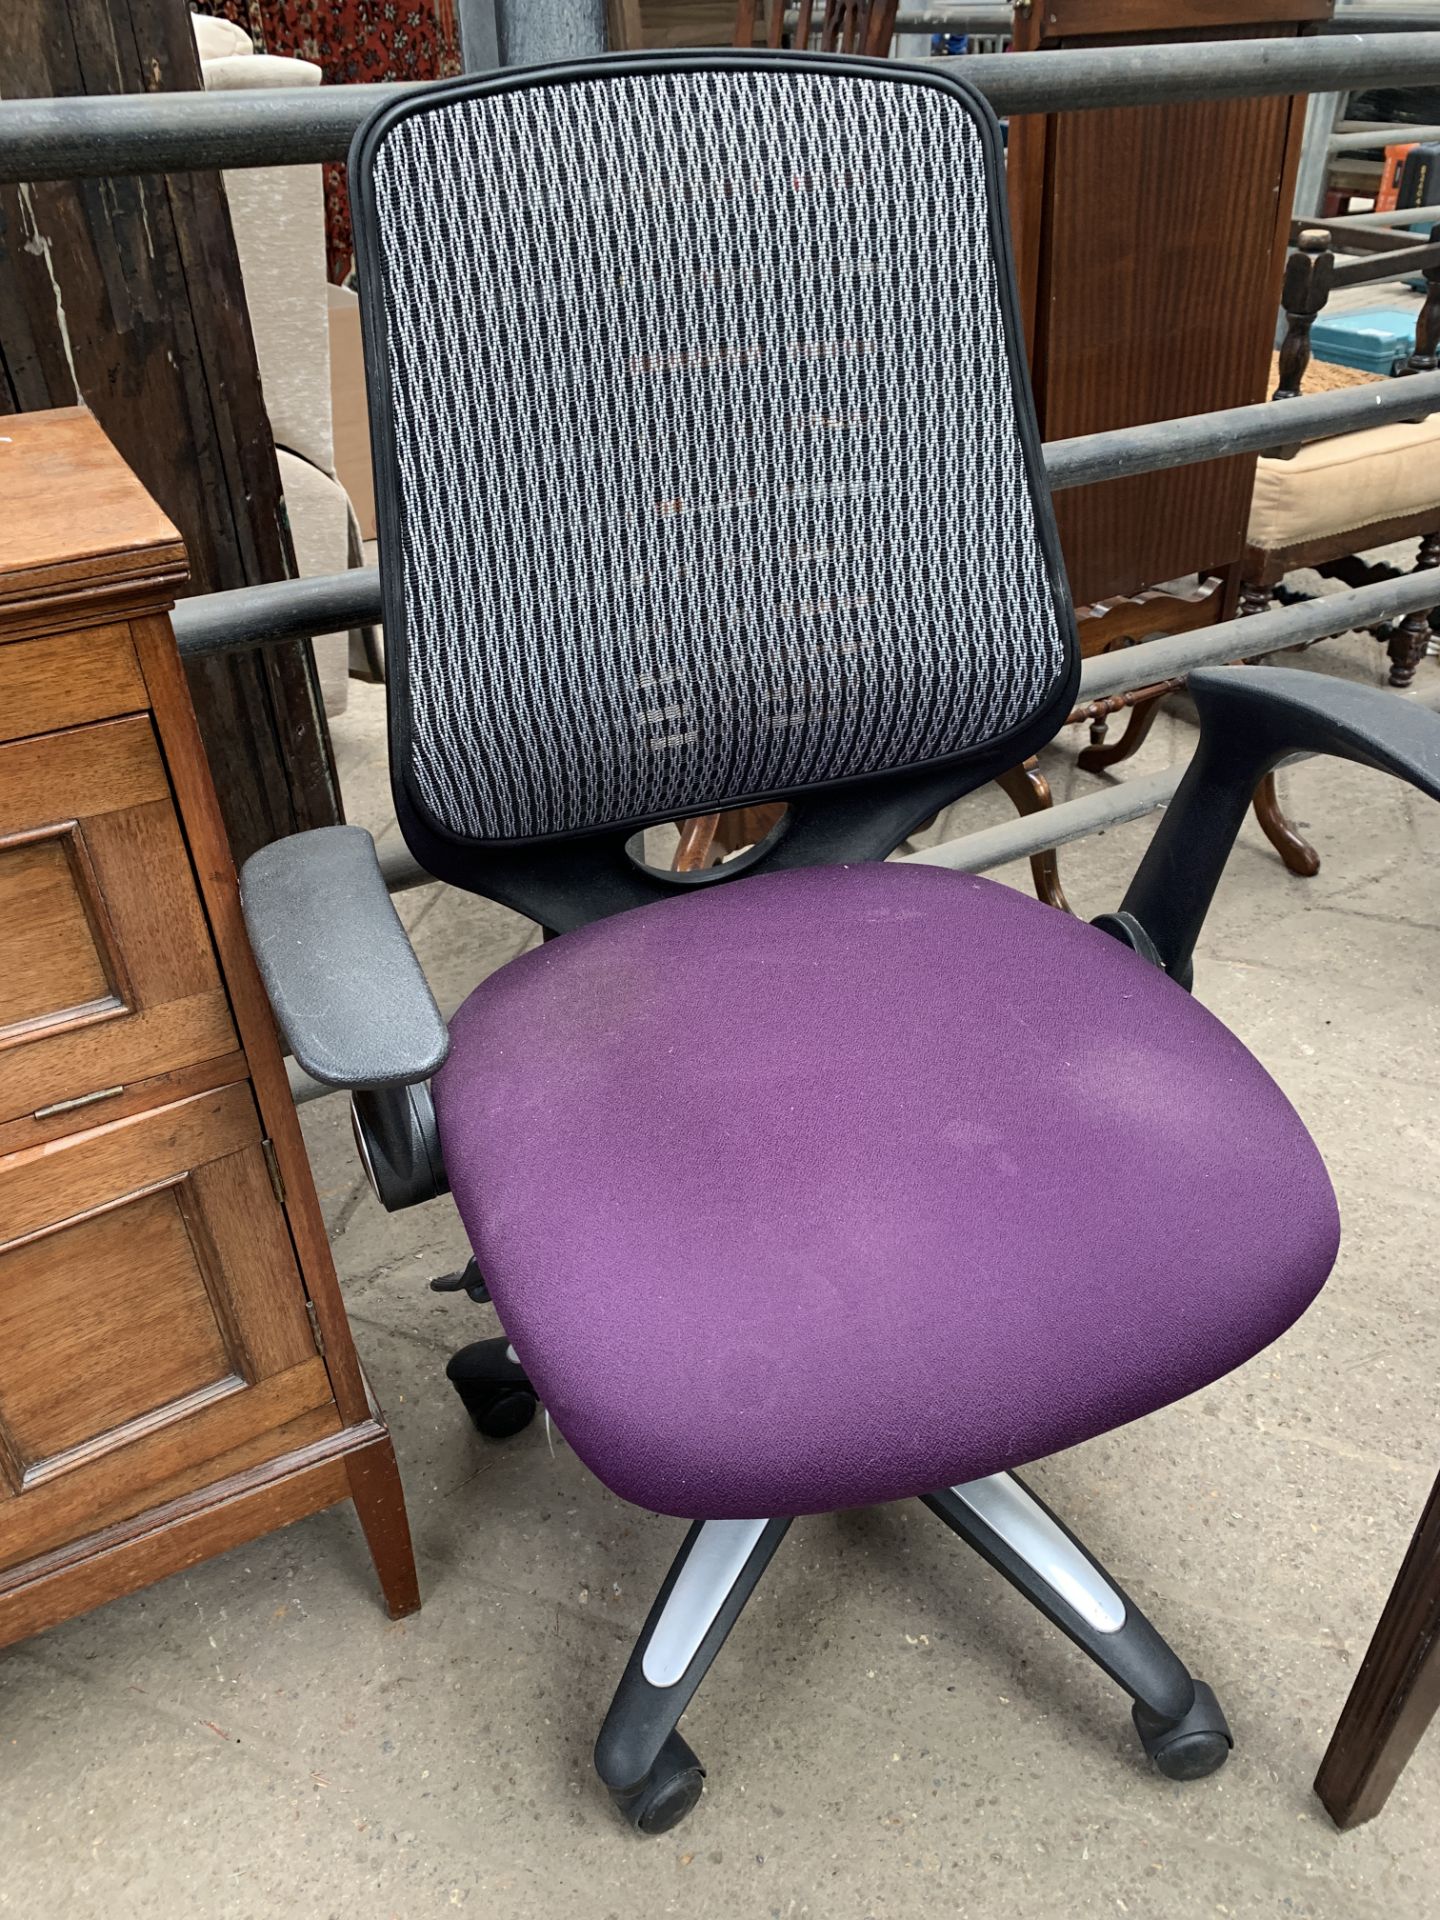 Height adjustable office chair - Image 2 of 4